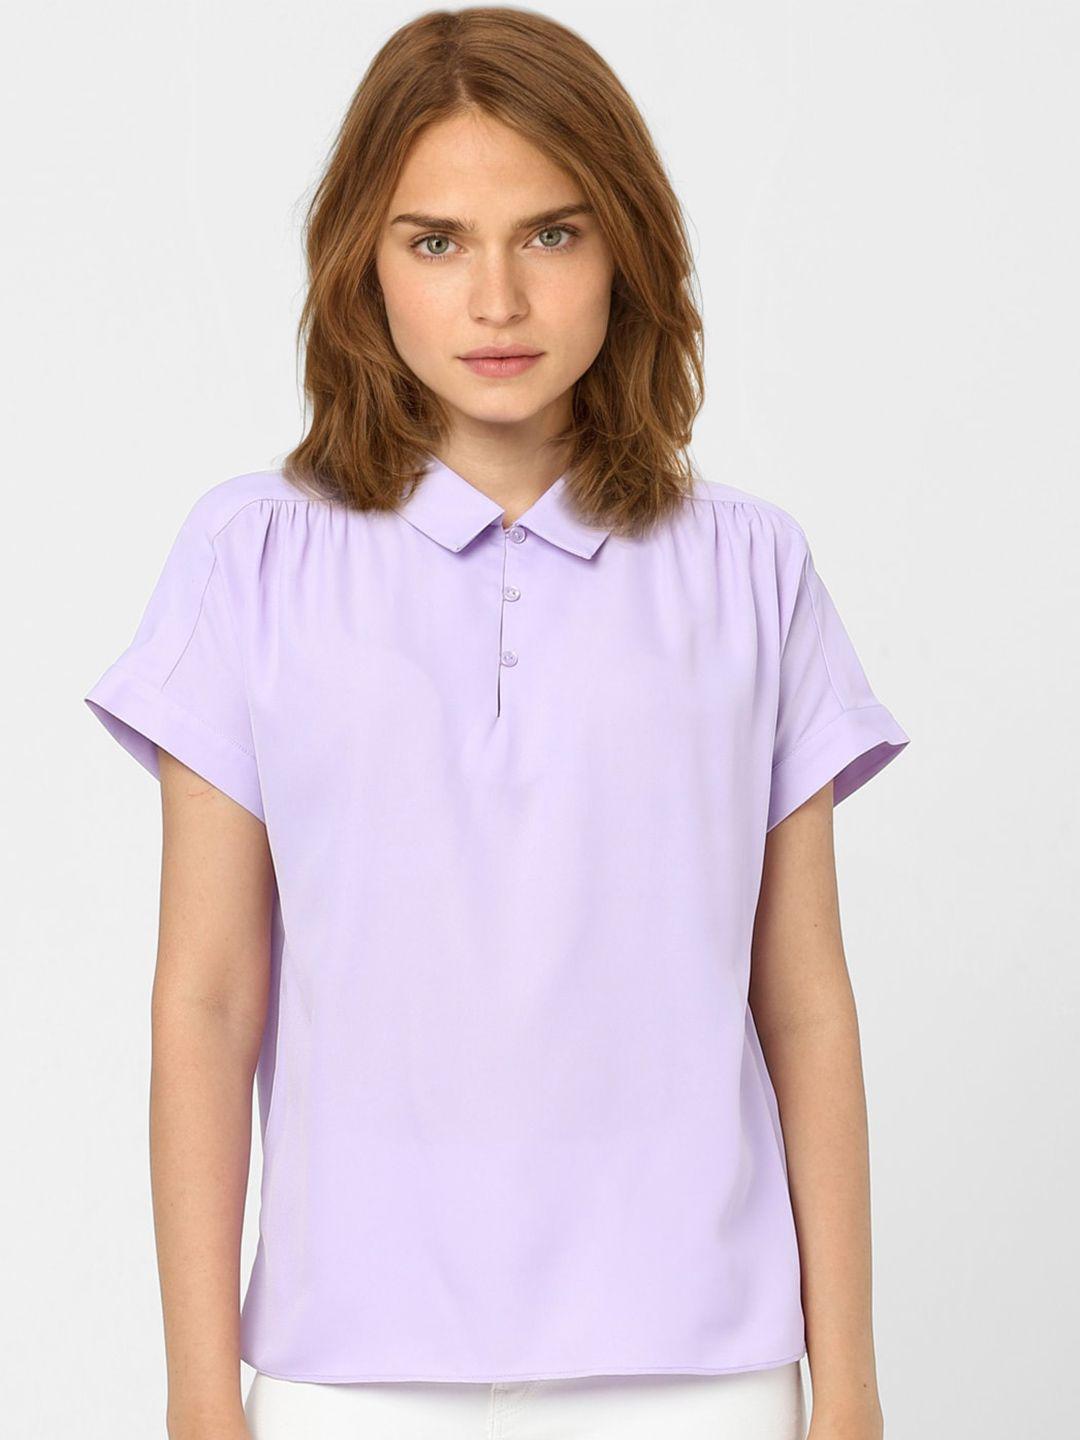 vero moda lavender extended sleeves shirt style top